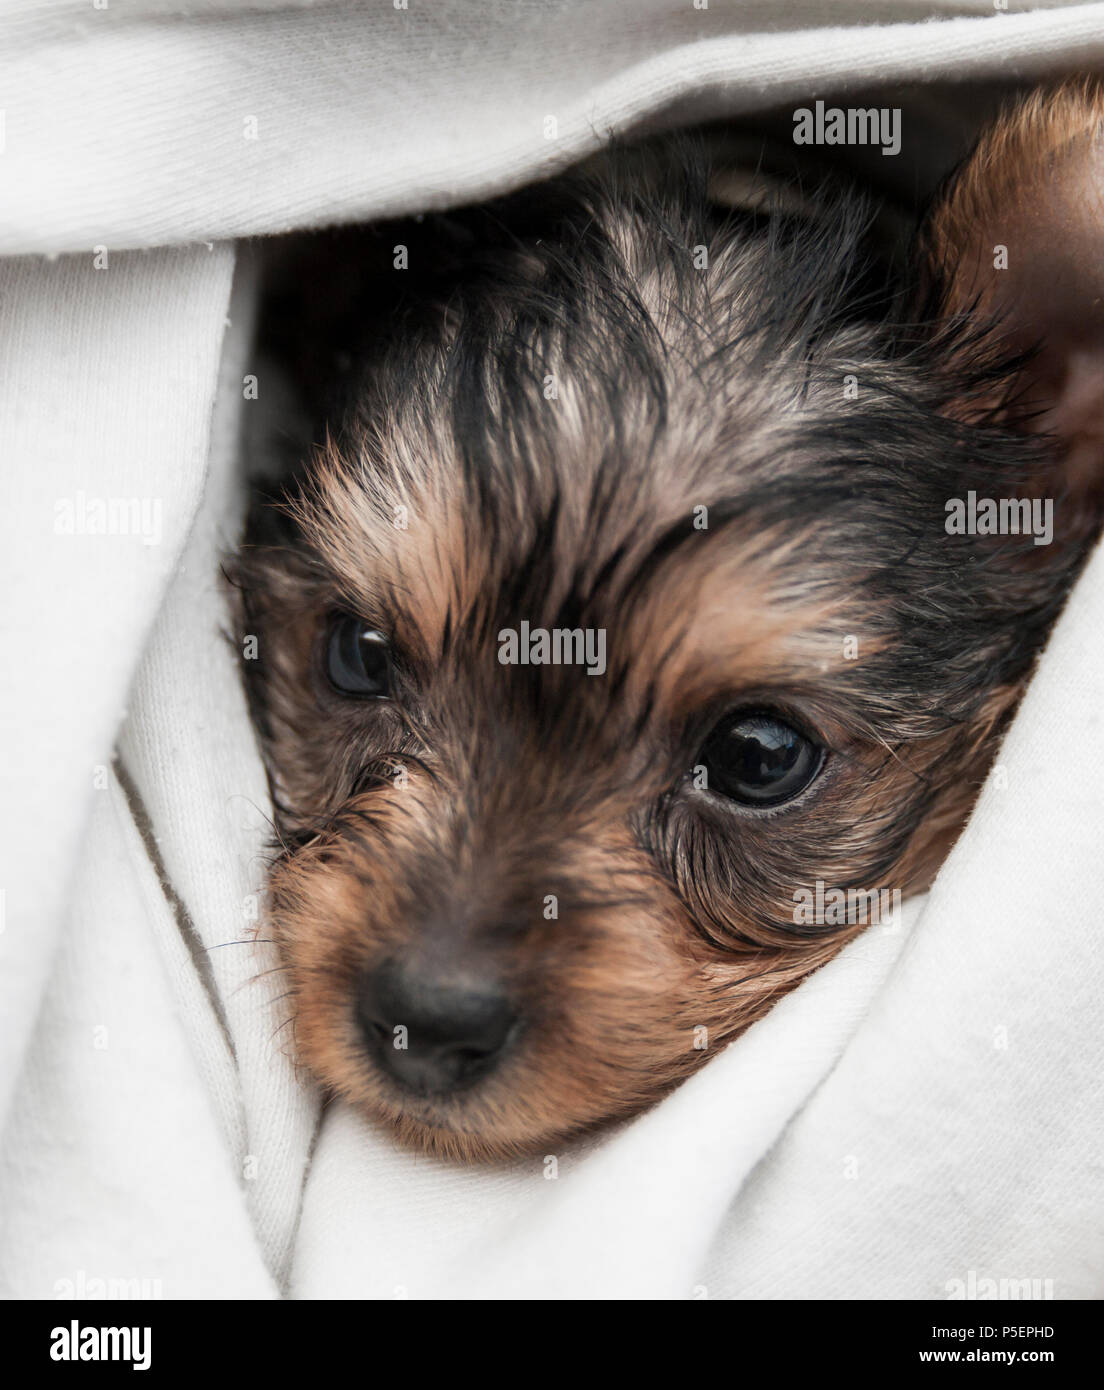 Cute four week old Yorkshire Terrier puppy wrapped in blanket Stock Photo